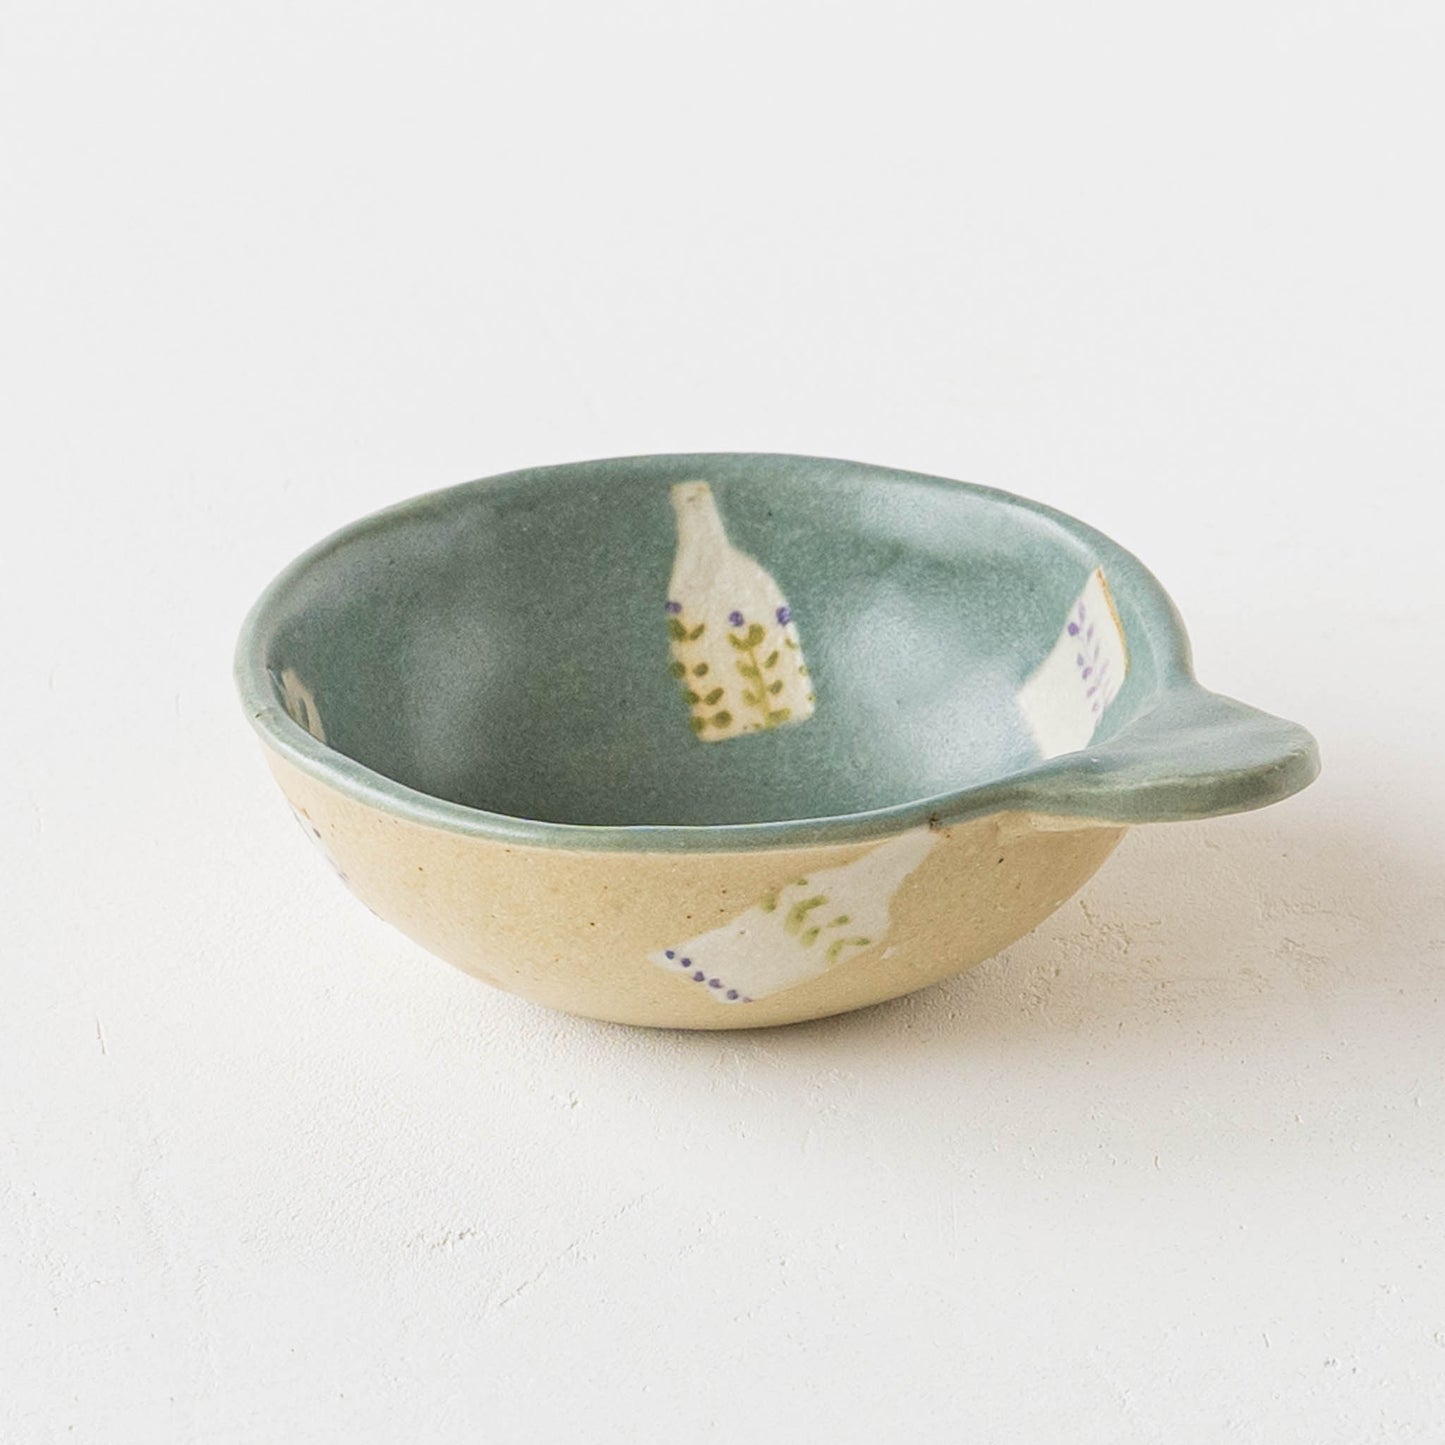 Bowl with ears colorful turquoise blue x light brown | Haruko Harada